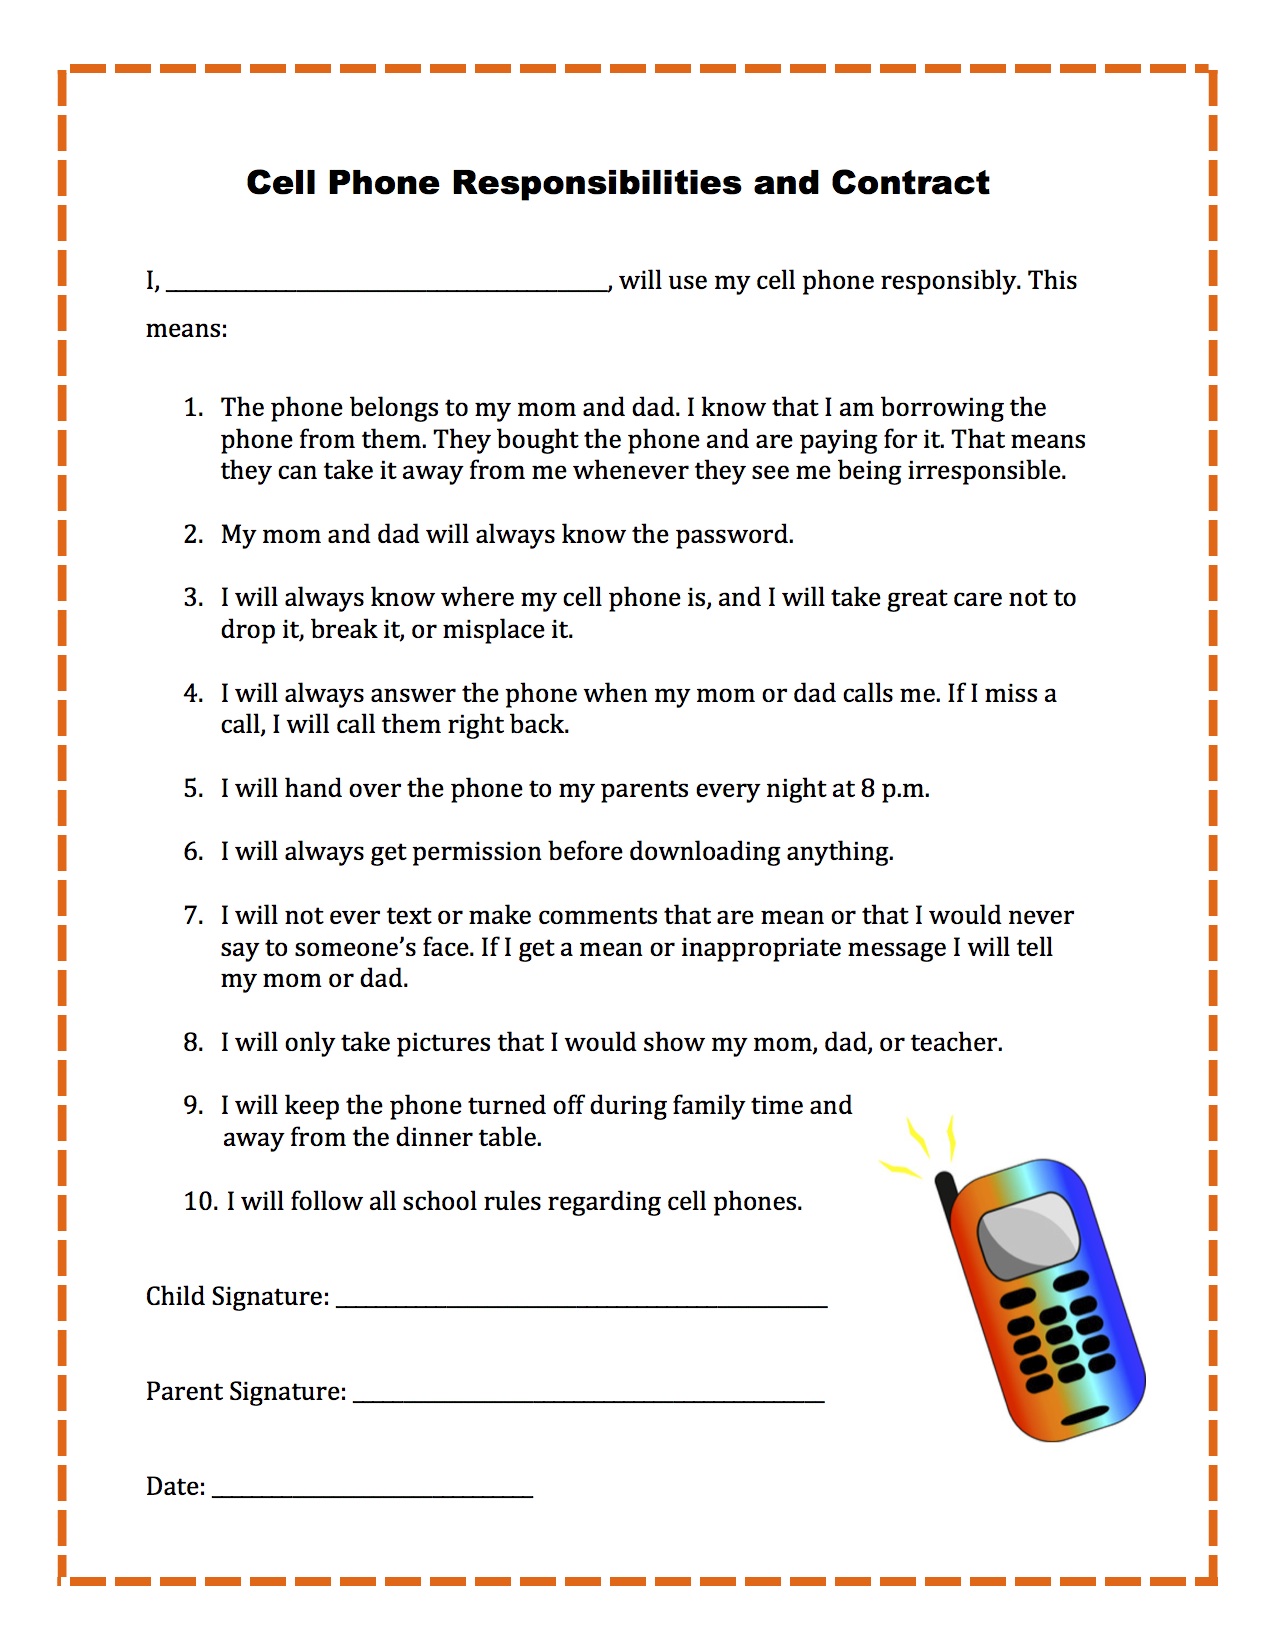 Cell Phone Contract